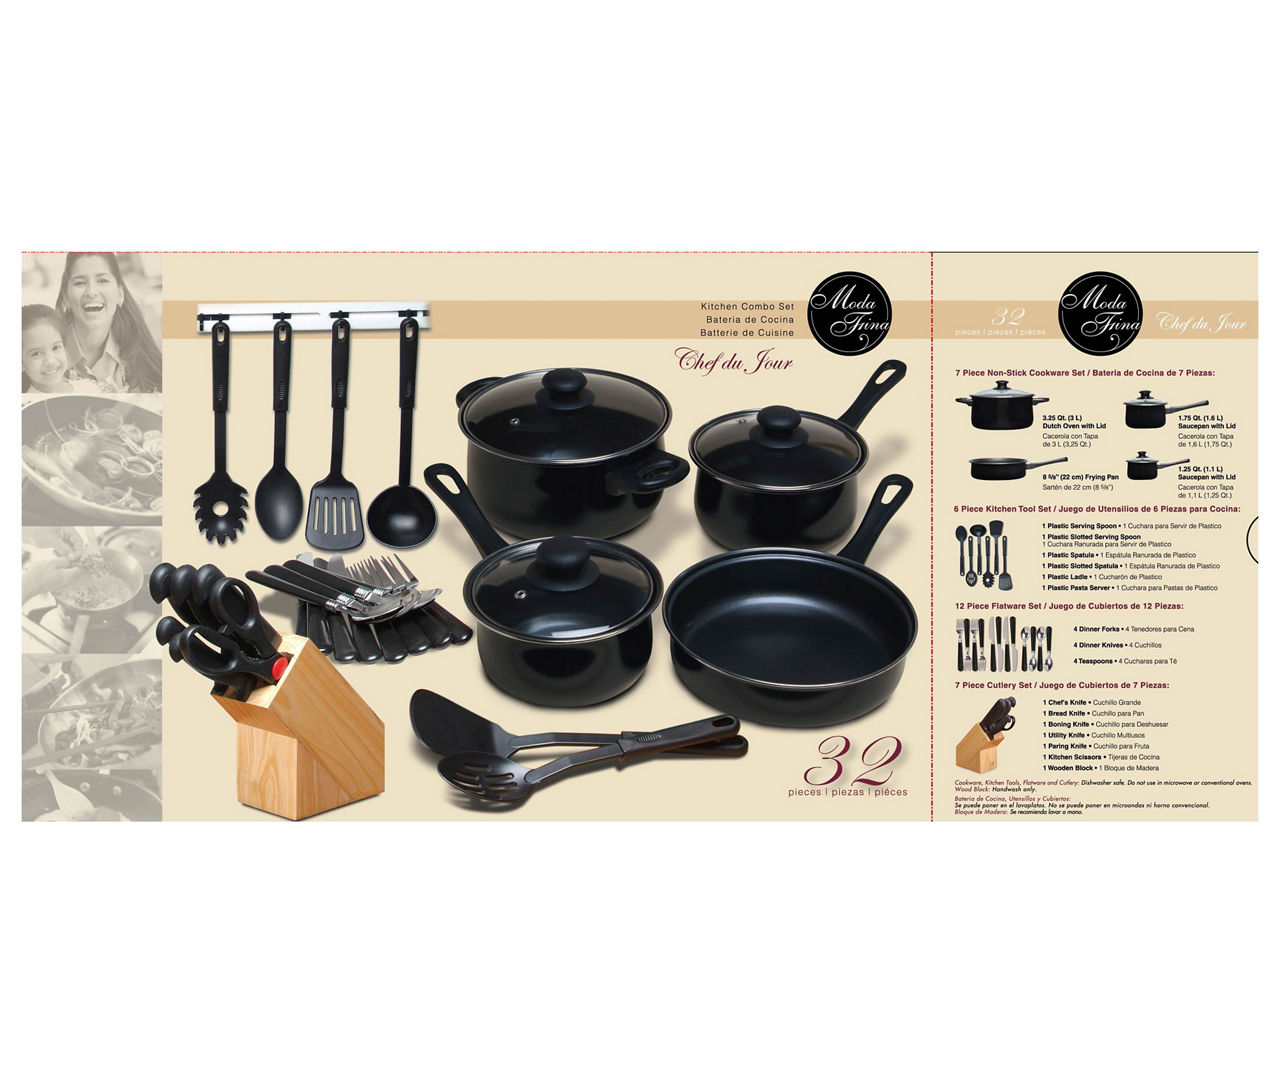  Gibson Home Back to Basics Stainless Steel Cookware Set, 32- Piece , Stainless Steel,Silver: Home & Kitchen